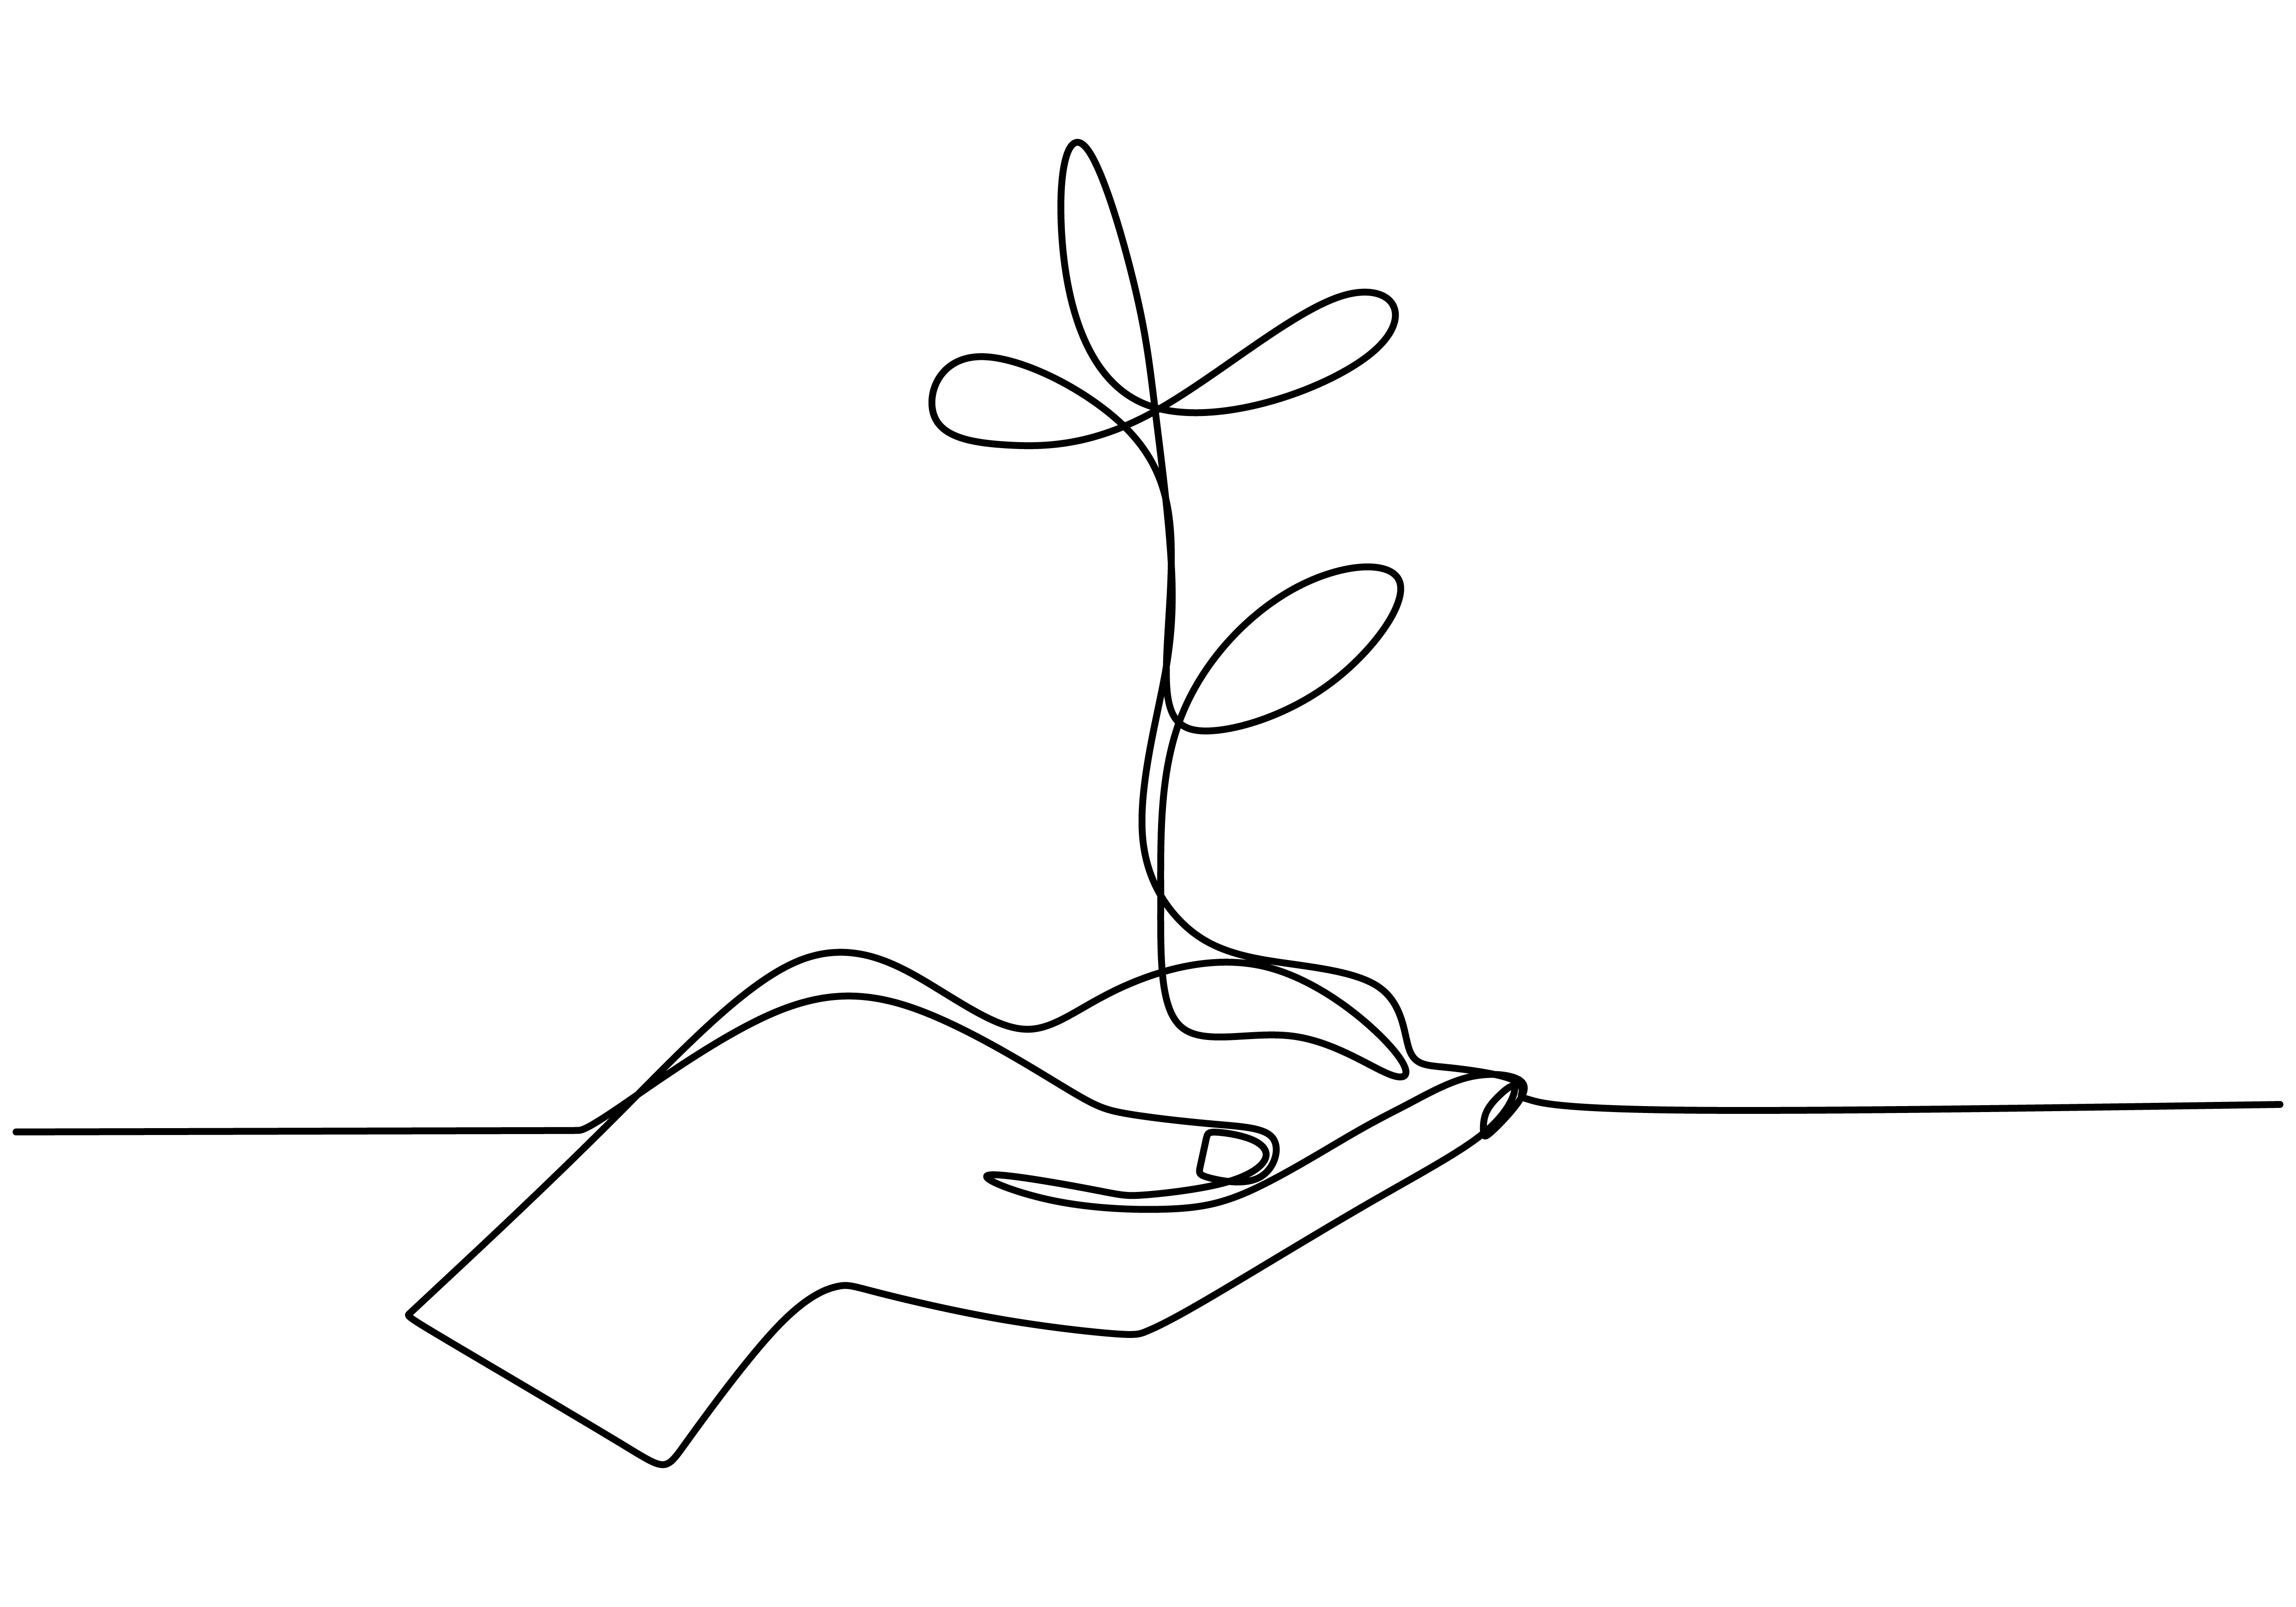 Hand holding plant's pot. Continuous line drawing of back to nature theme. 1895818 Art Vecteezy